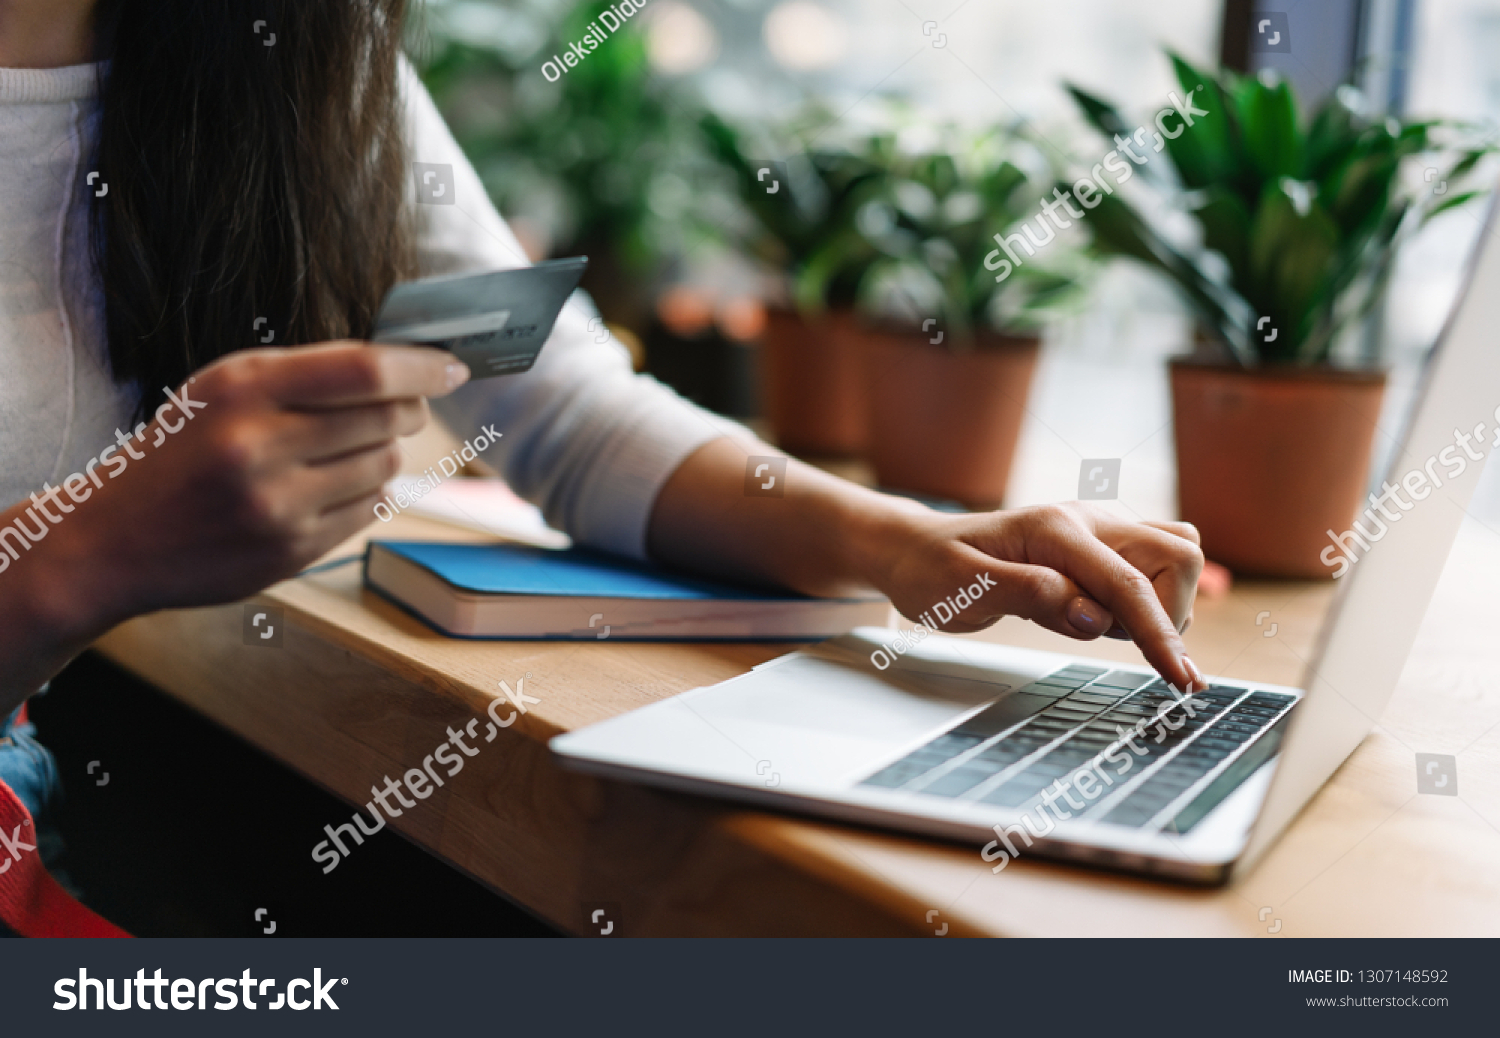 Close up woman's hand holding credit card using laptop computer for online shopping with cash back, discount sales, low prices. Online store concept. Female planning travel and booking tickets. #1307148592